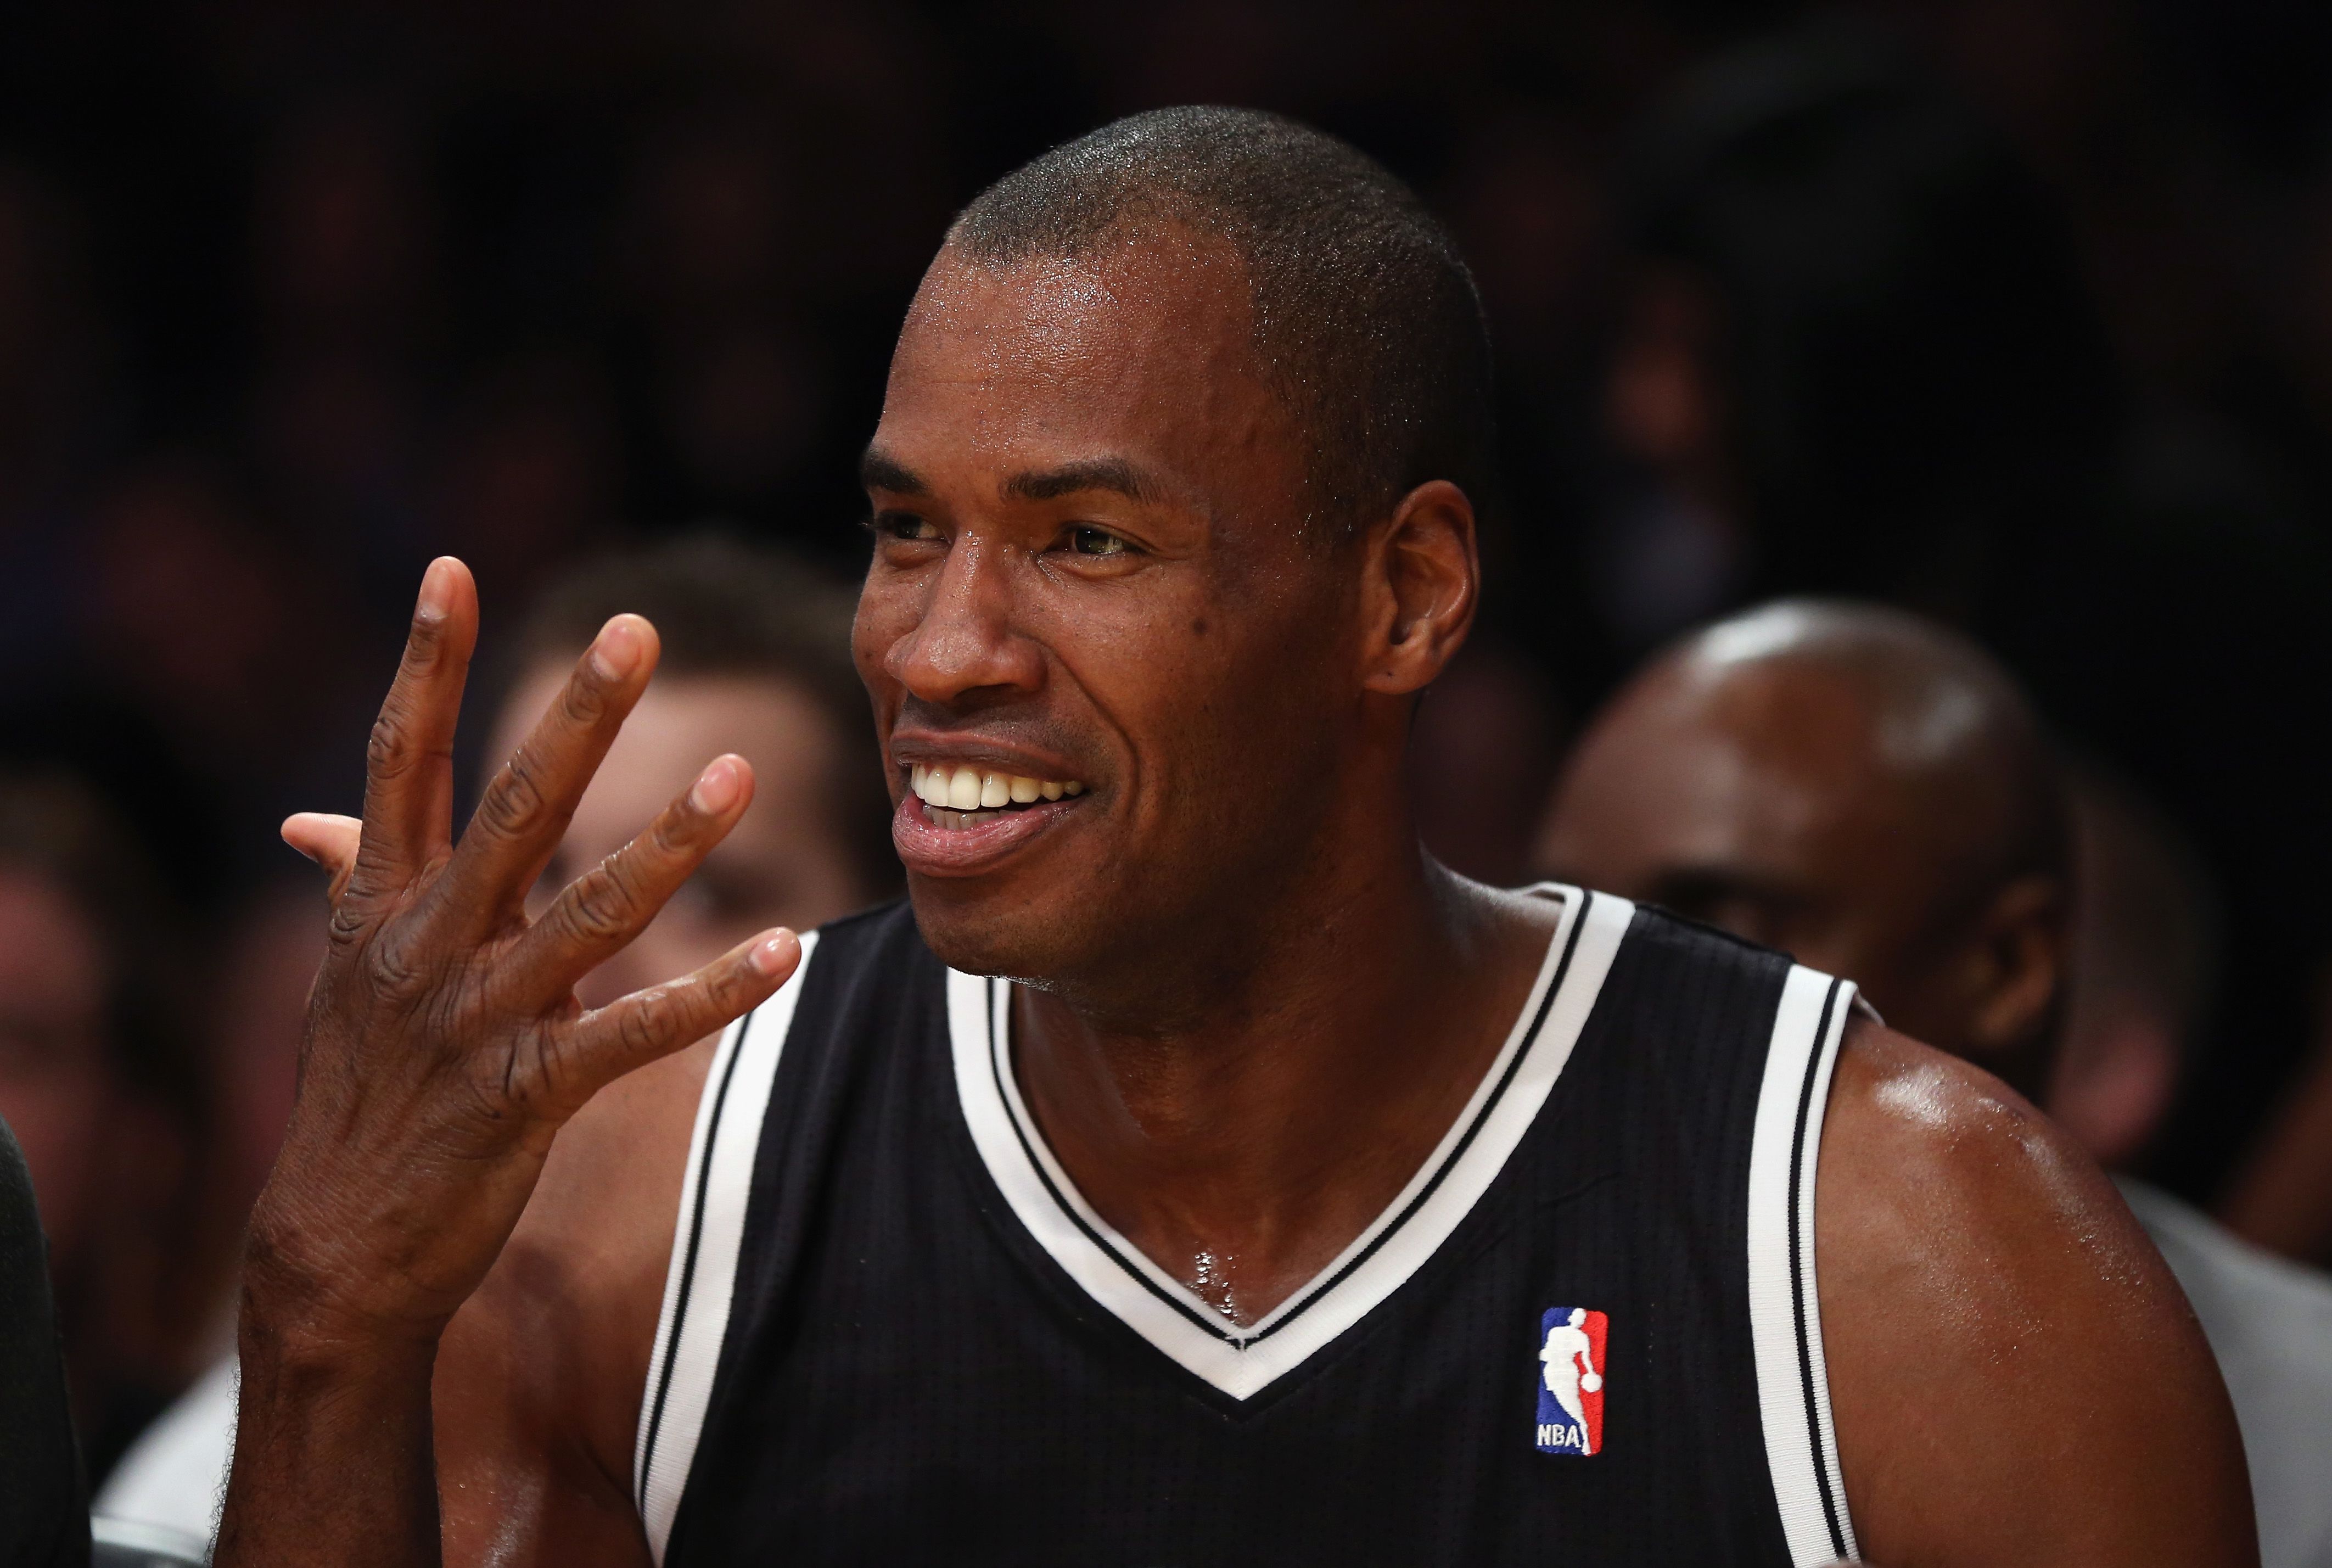 Ten years after, Jason Collins reflects on how he changed the NBA